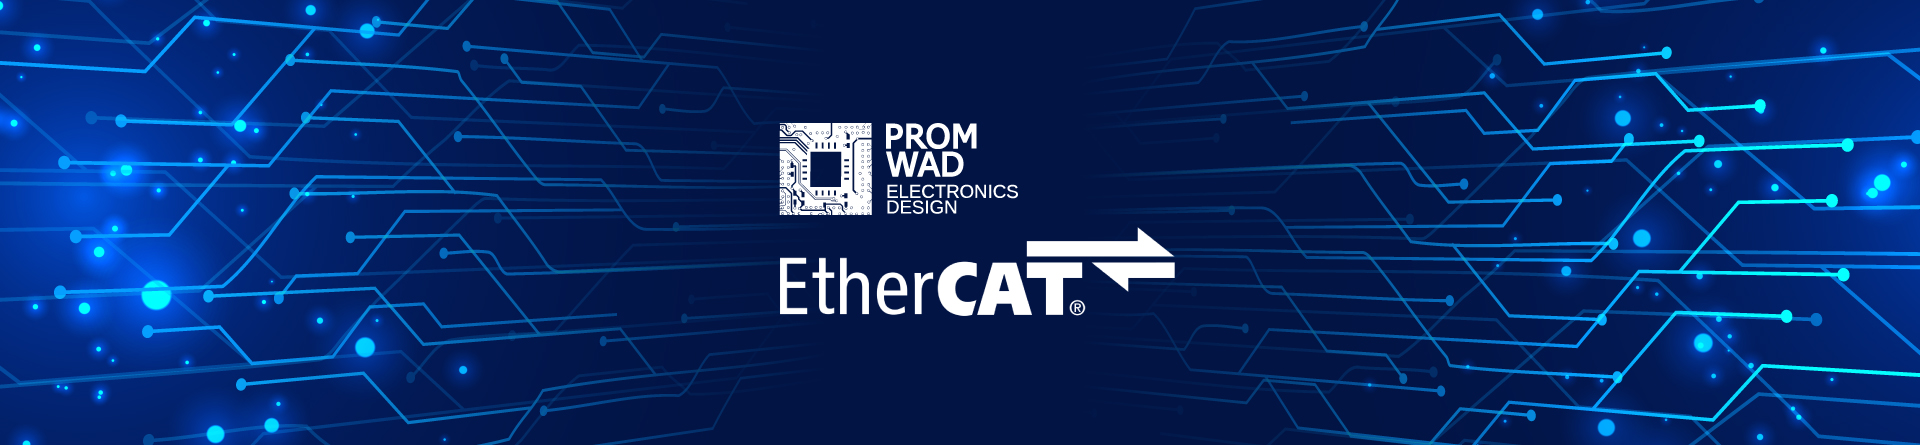 promwad-joined-ethercat